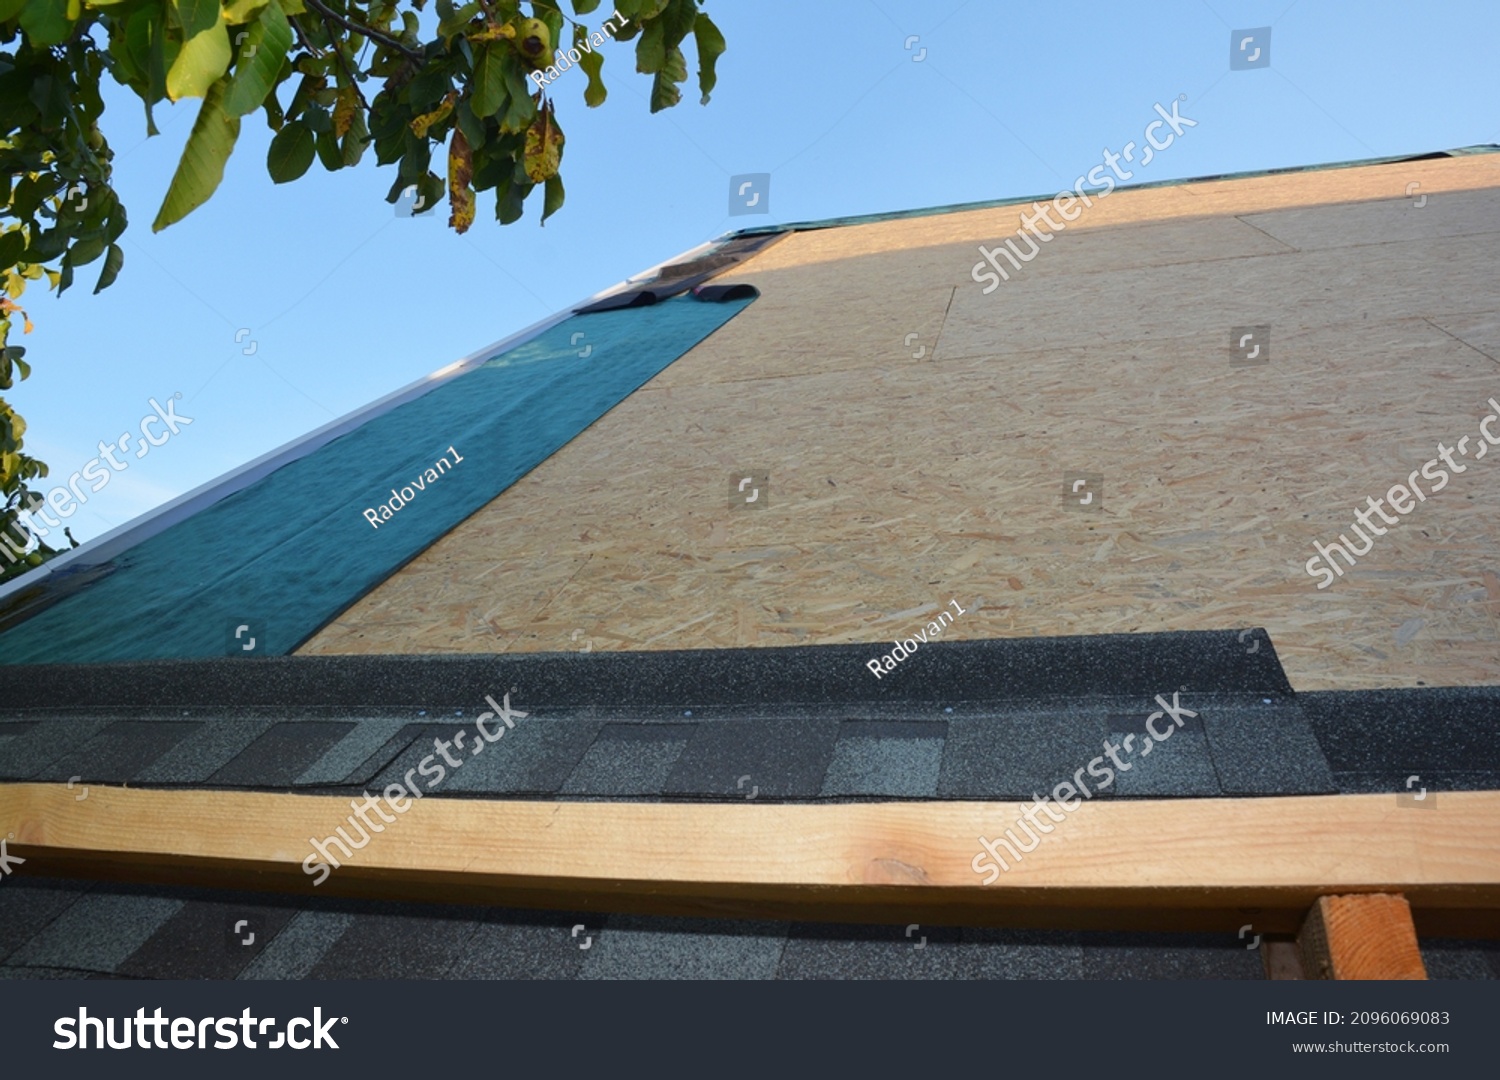 New roofing construction and asphalt shingles installation. A close-up of asphalt shingles installation on plywood, osb roof sheathing and waterproofing roof underlayment. #2096069083